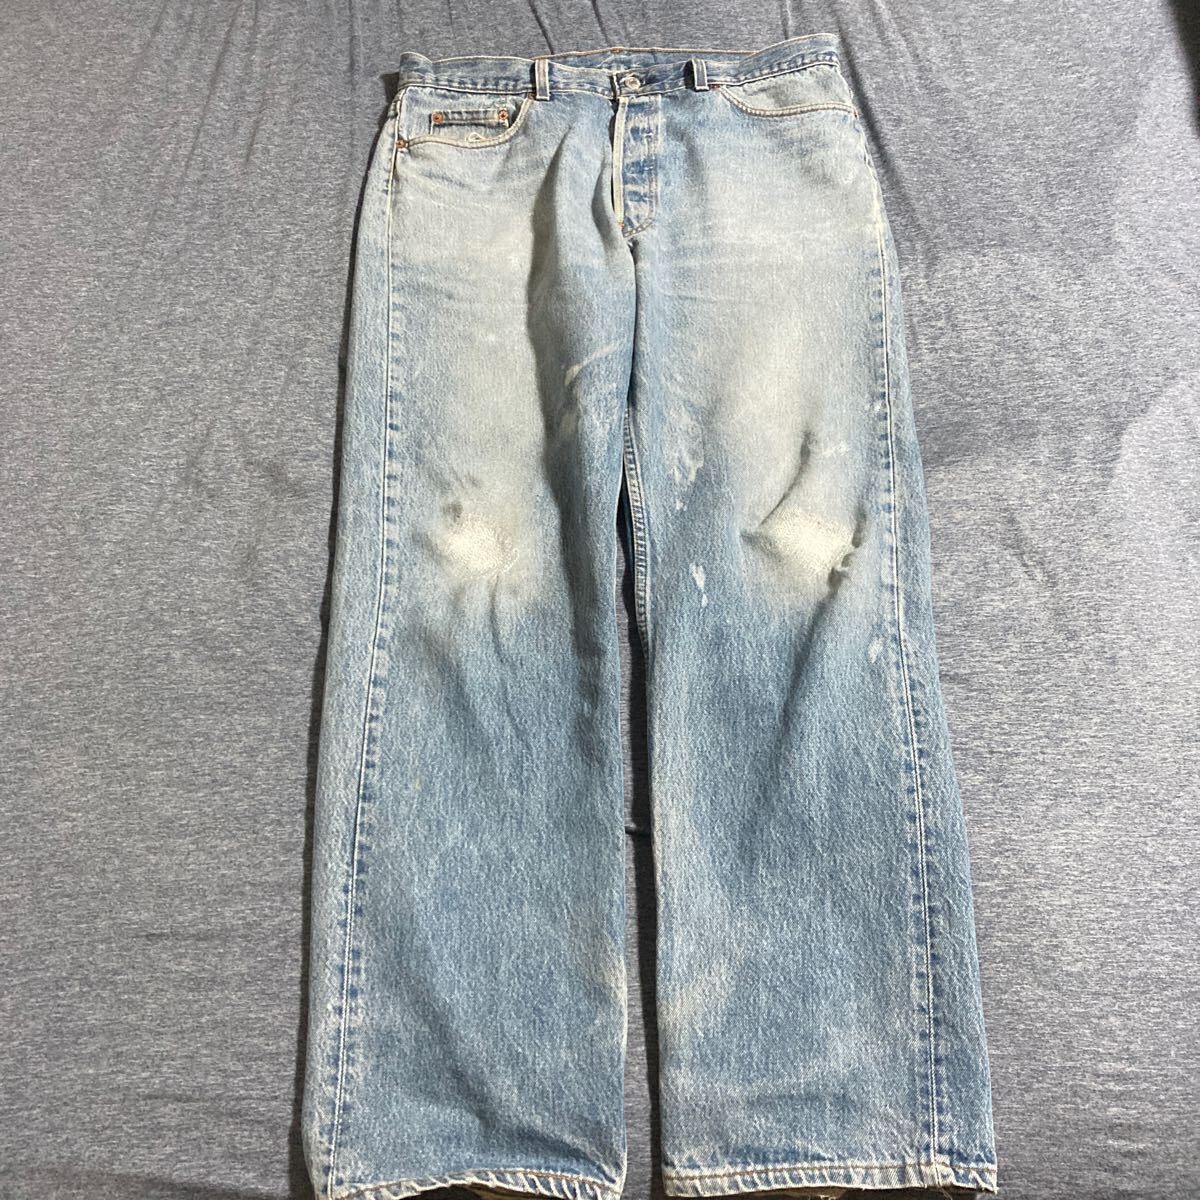 94 year made 90s Vintage LEVIS Levi's 501 USA made strut Denim pants jeans ji- bread W38 L32 66 previous term America made Levi